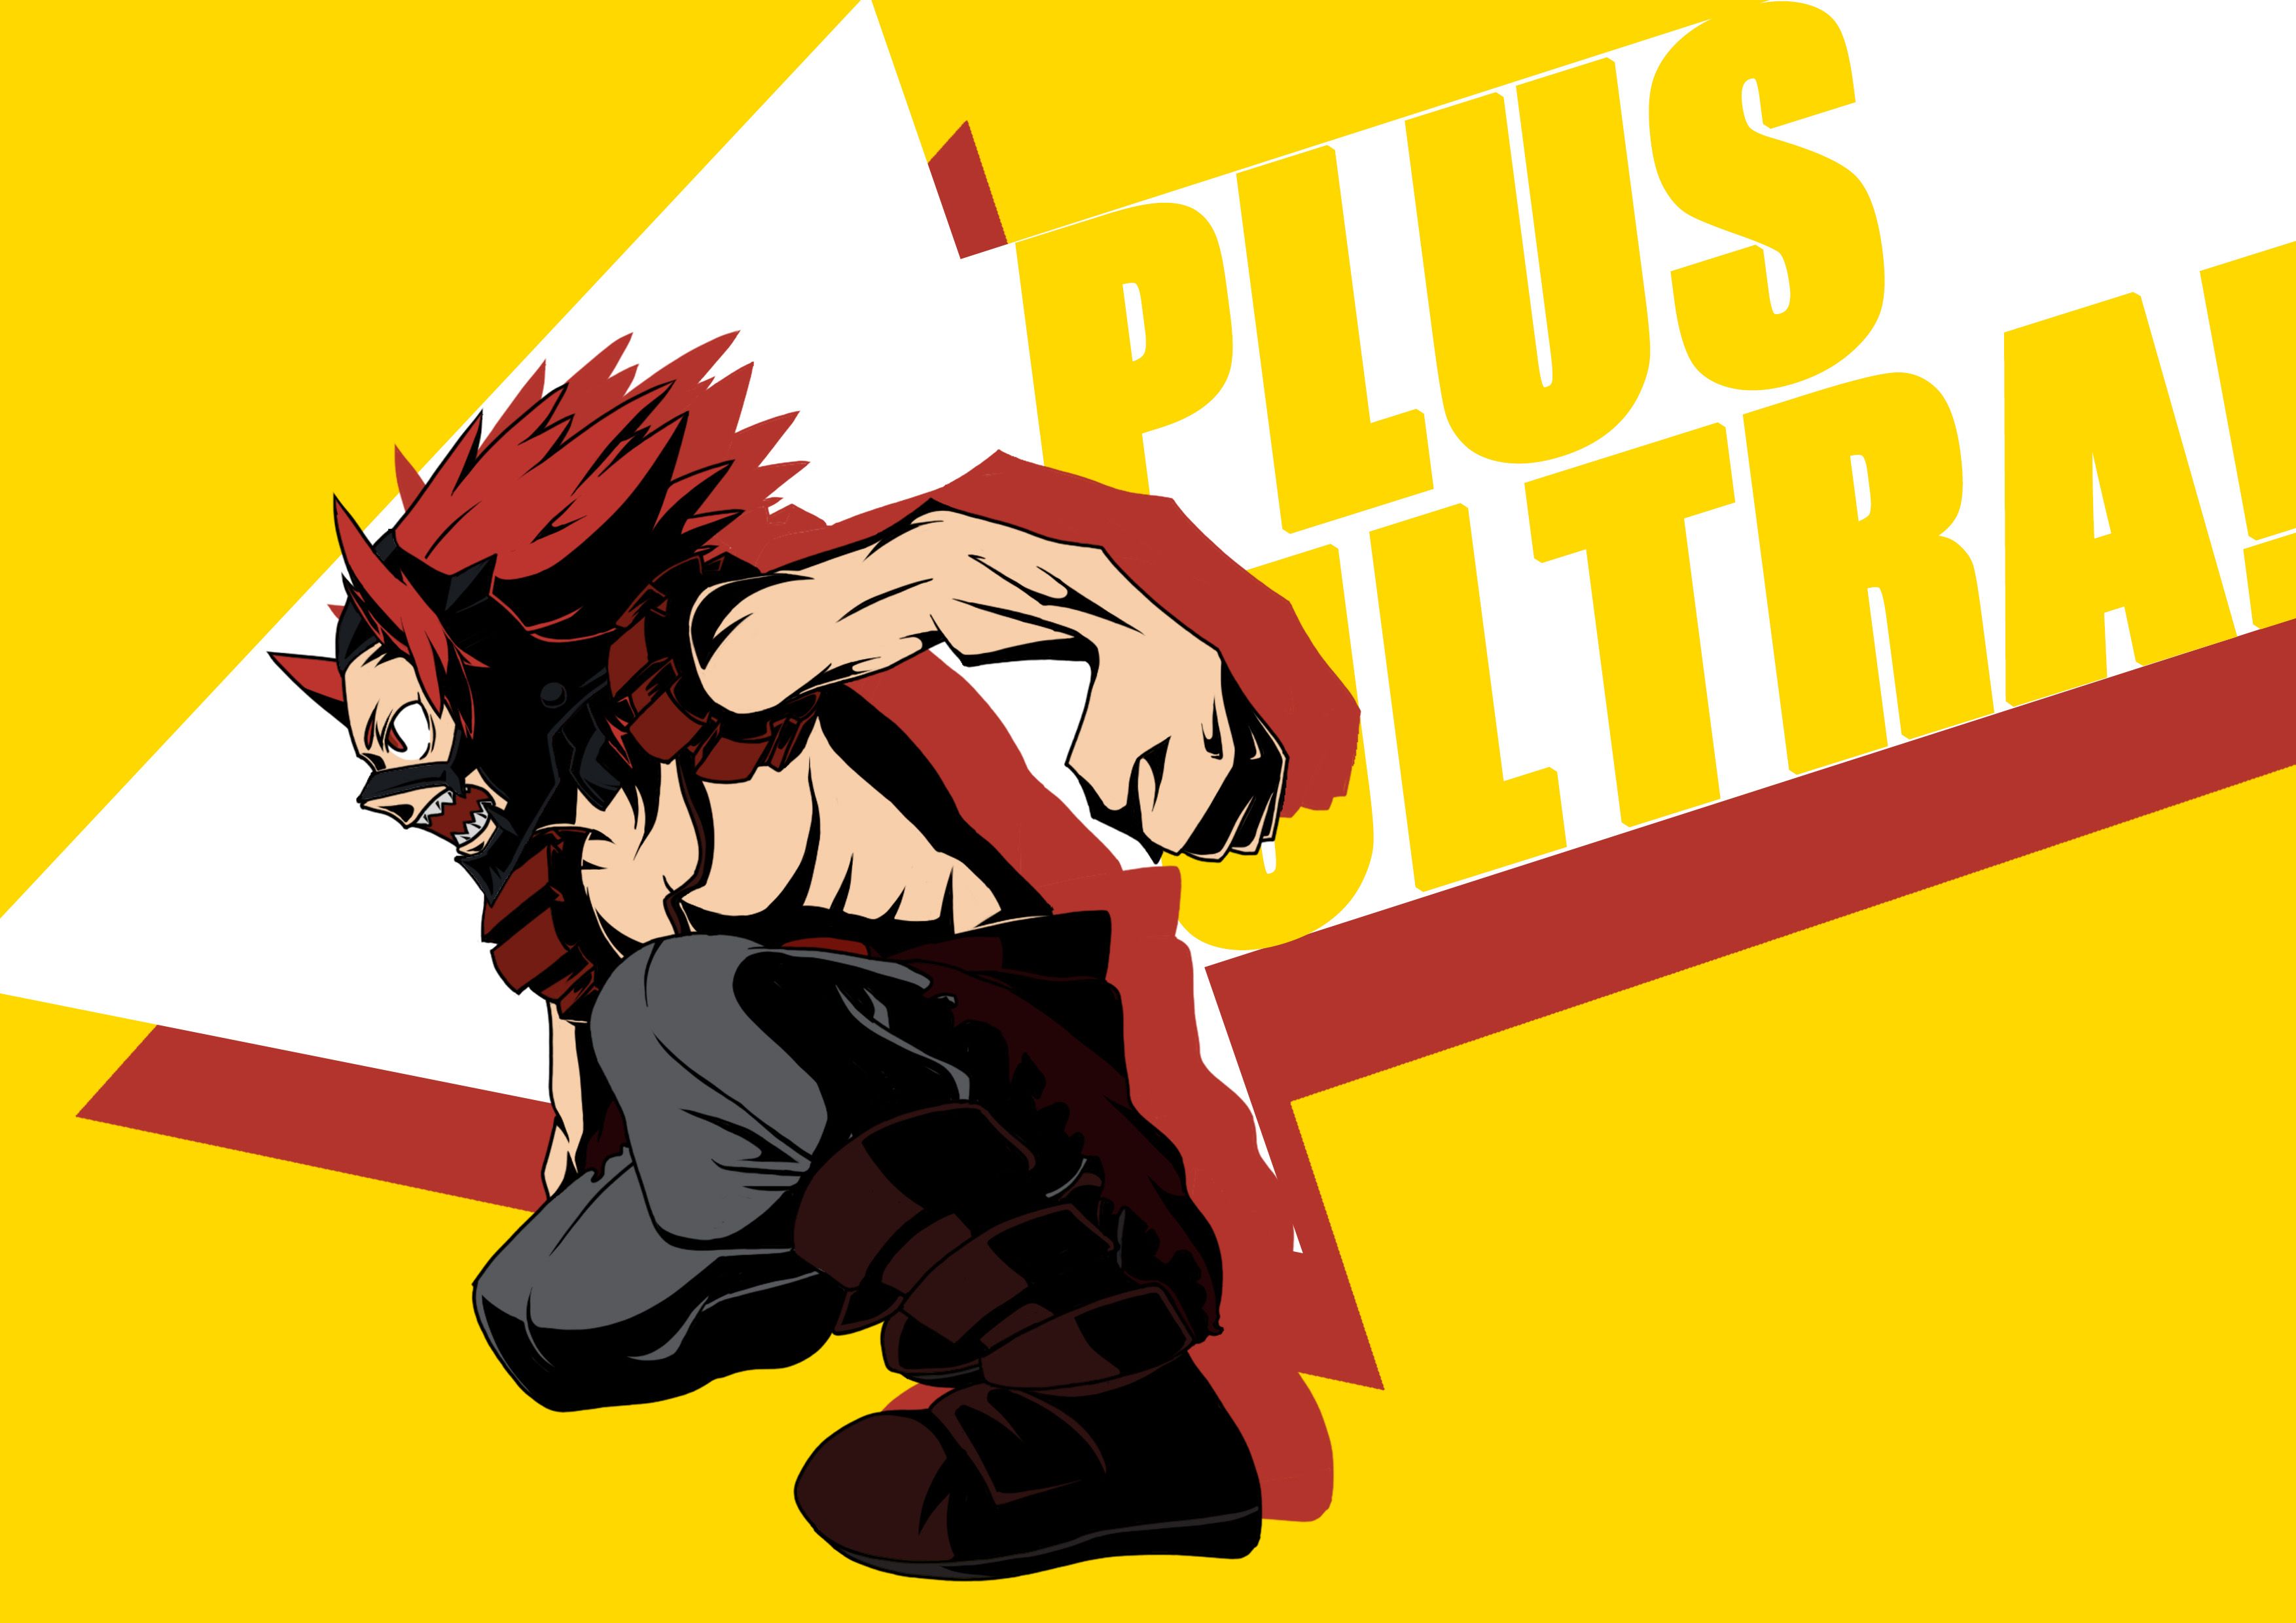 Kirishima Wallpapers posted by Christopher Simpson.